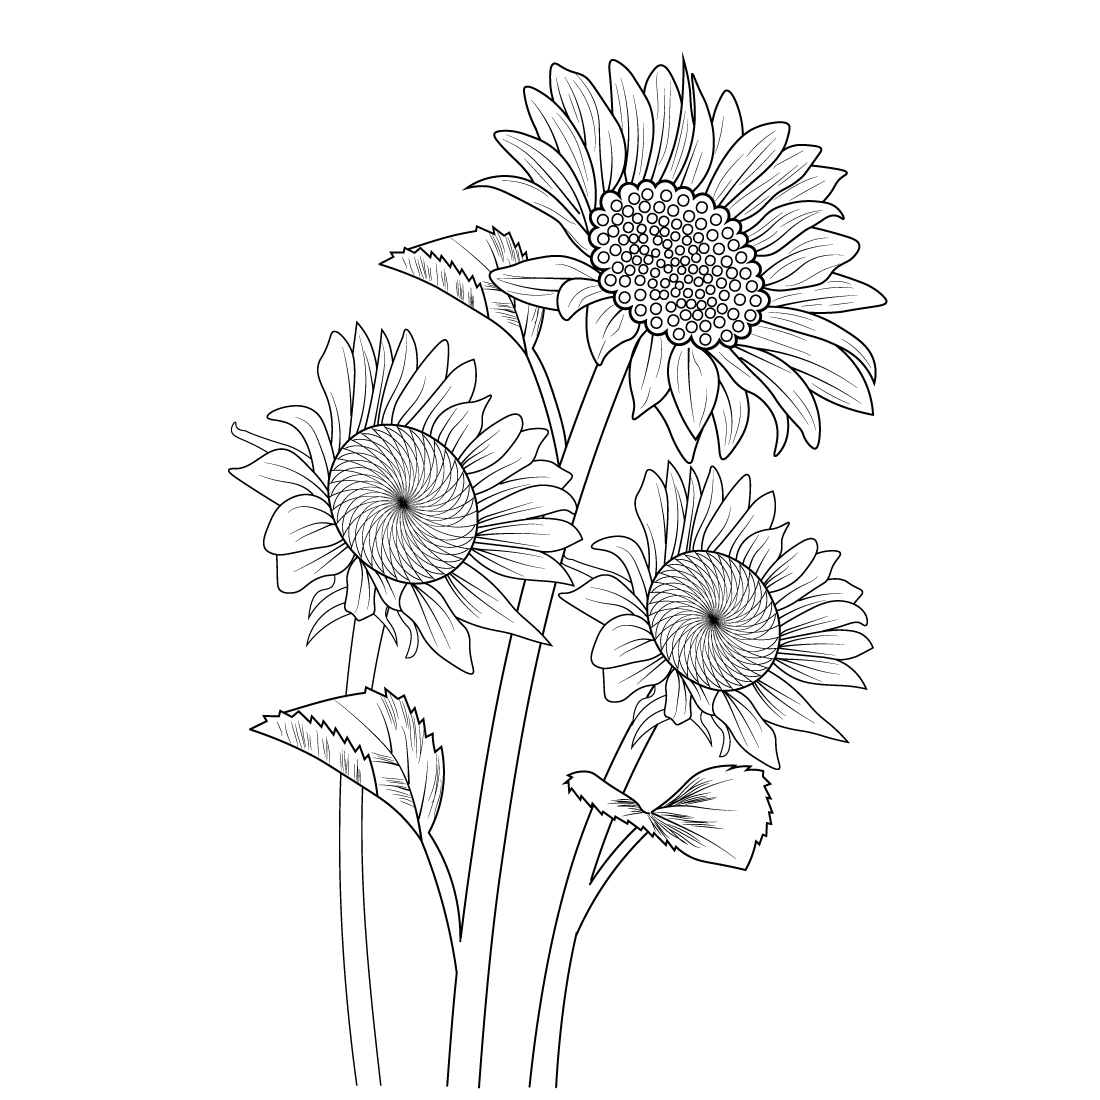 sunflower line art, floral vector illustration, vintage engraved style flowers with sunflowers isolated on white background, and hand-drawn botanical sunflowers botanical illustration sunflower botanical drawing, beautiful monochrome sunflower vector sketch blossom sunflower drawing branch vector illustration cover image.